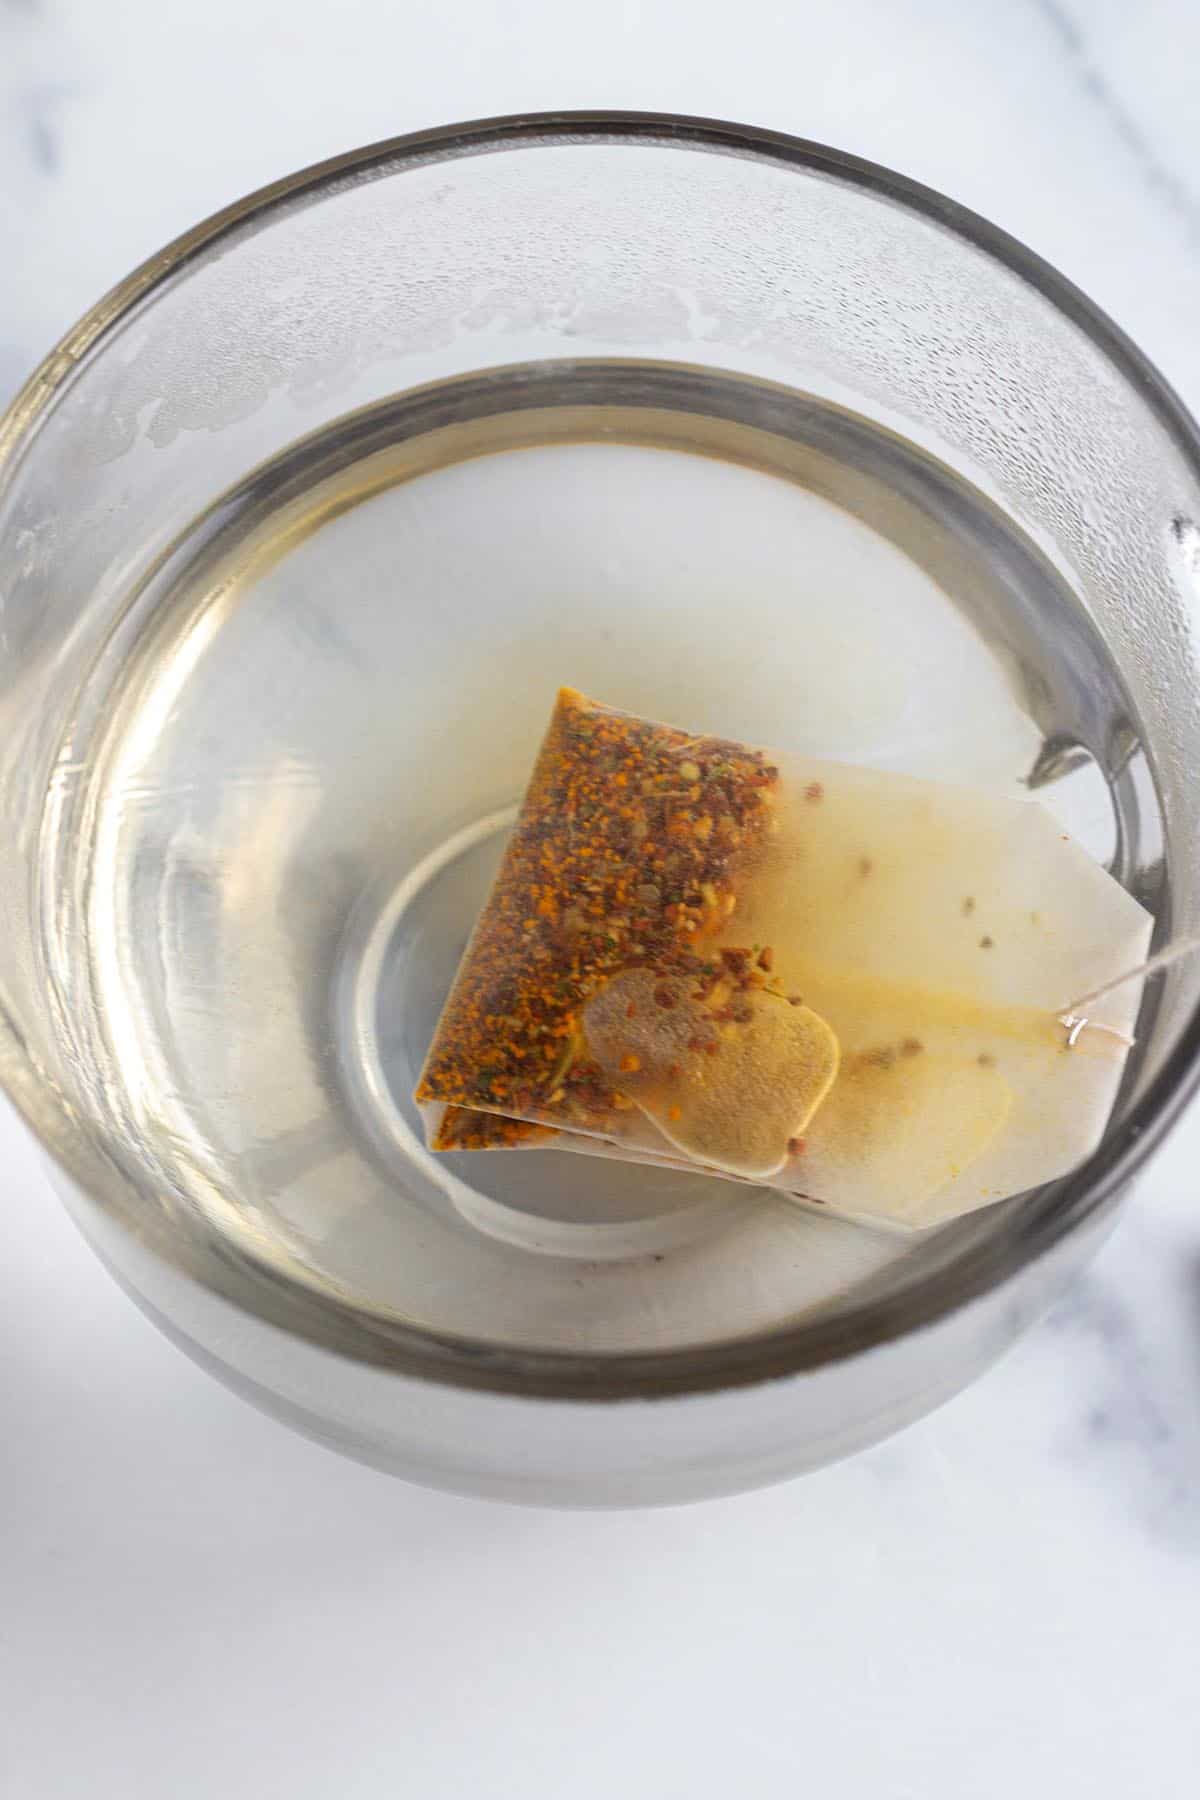 A glass mug with hot water and a tea bag steeping.